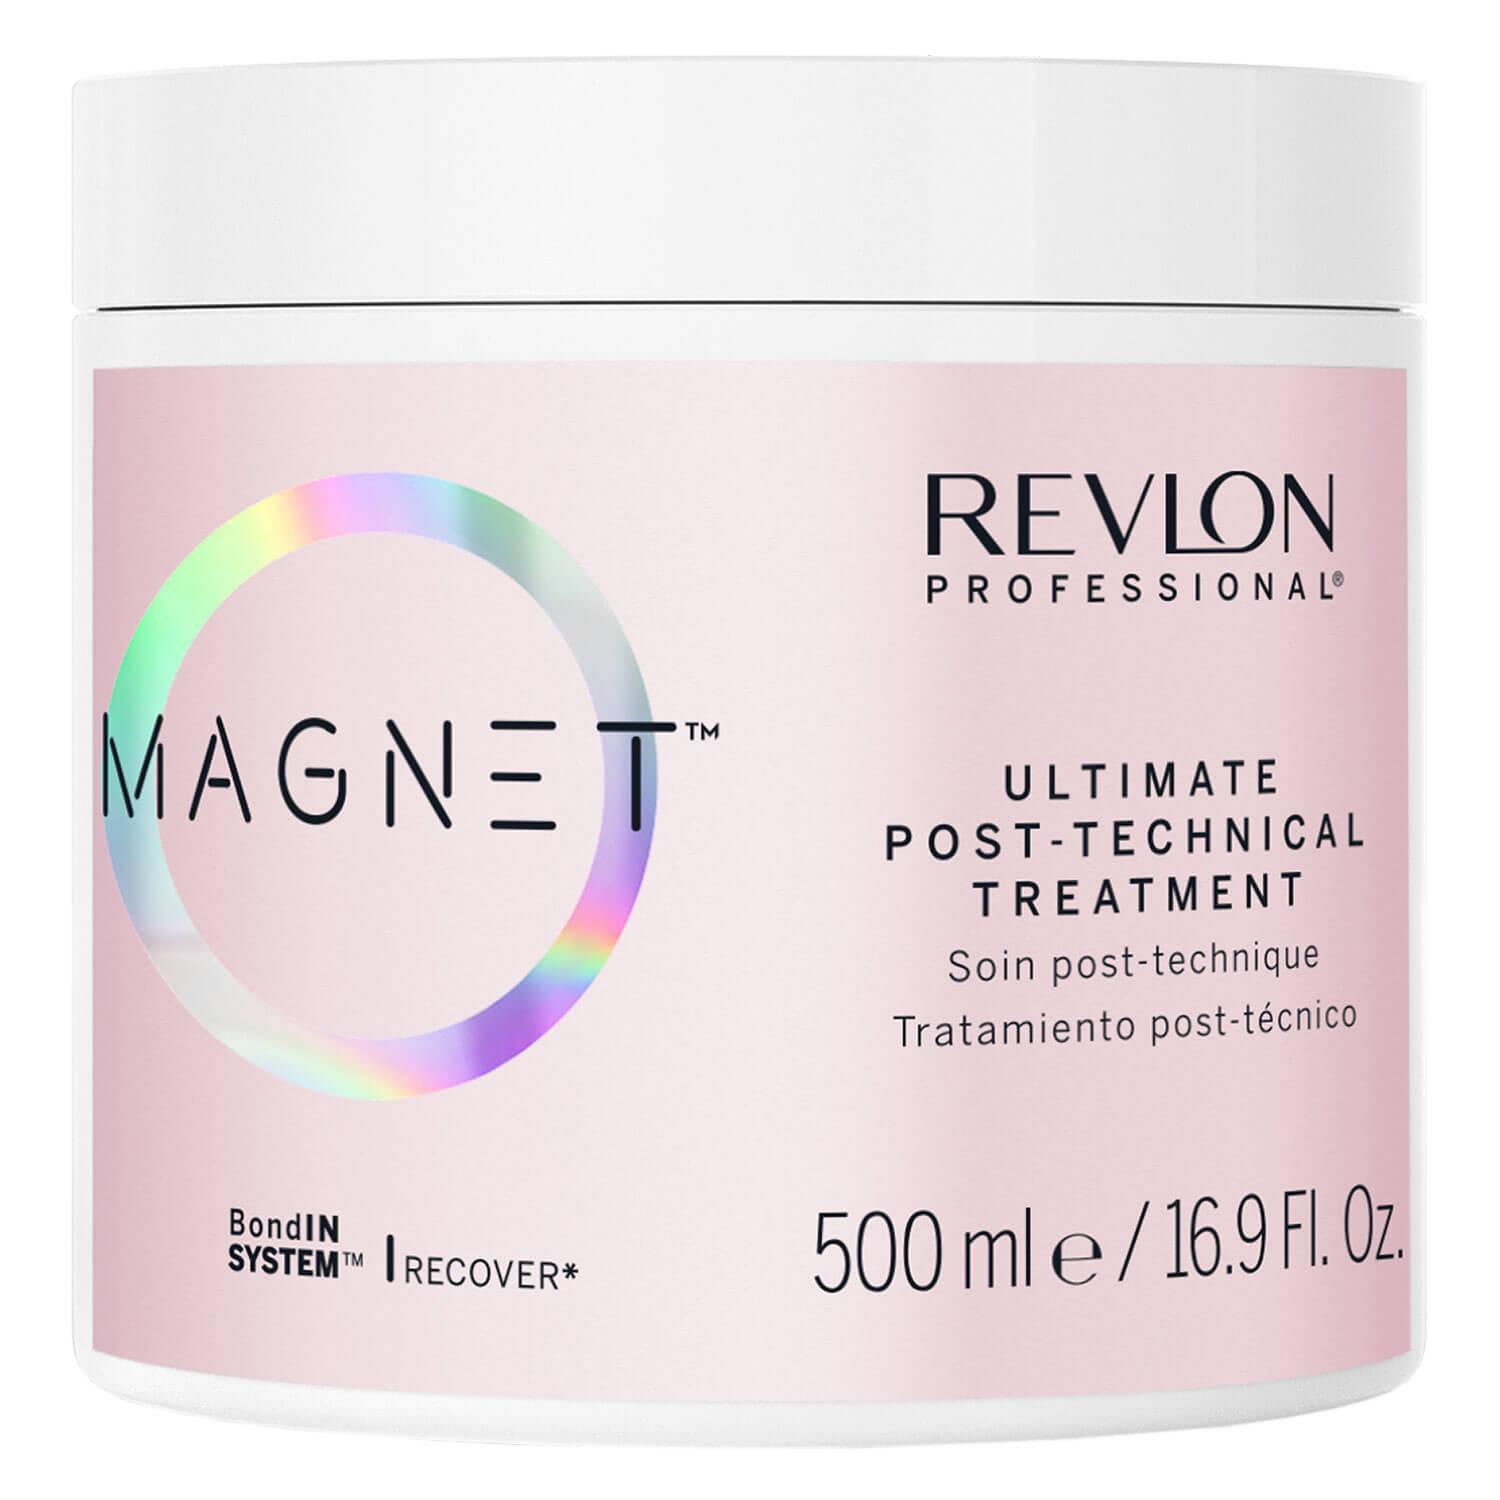 Magnet - Ultimate Post-Technical Treatment